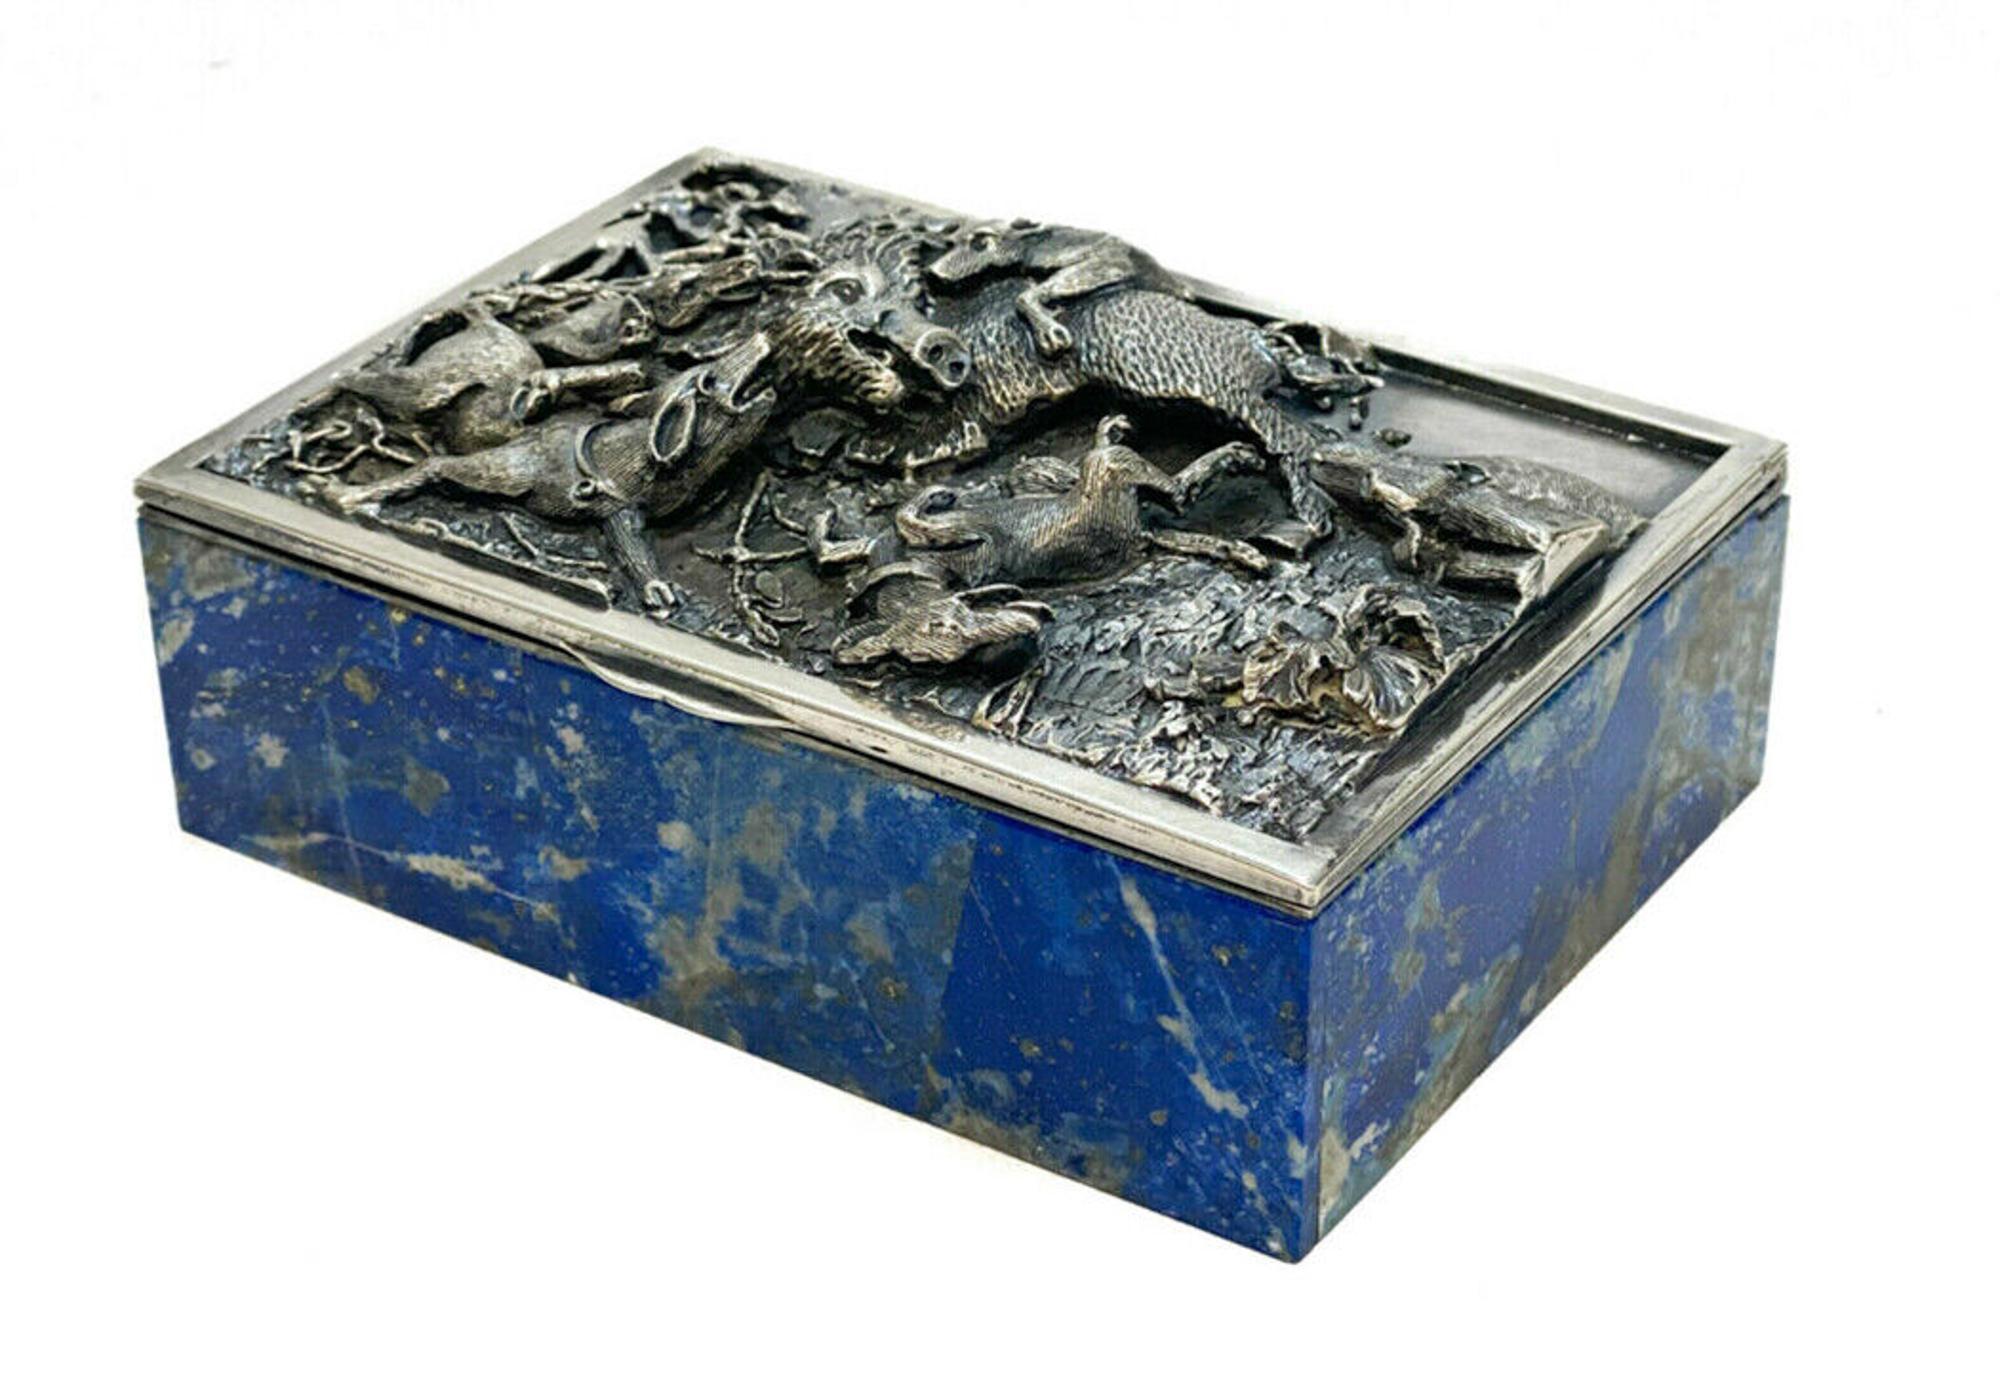  Taillan Adriano for Dunhill 800 silver lapis lazuli & white  quartz  cigarette  box, circa 1970.800 silver cover lid and mounts with a finely detailed high relief boar hunting scene to the central image. Lapis Lazuli to the walls and white quartz